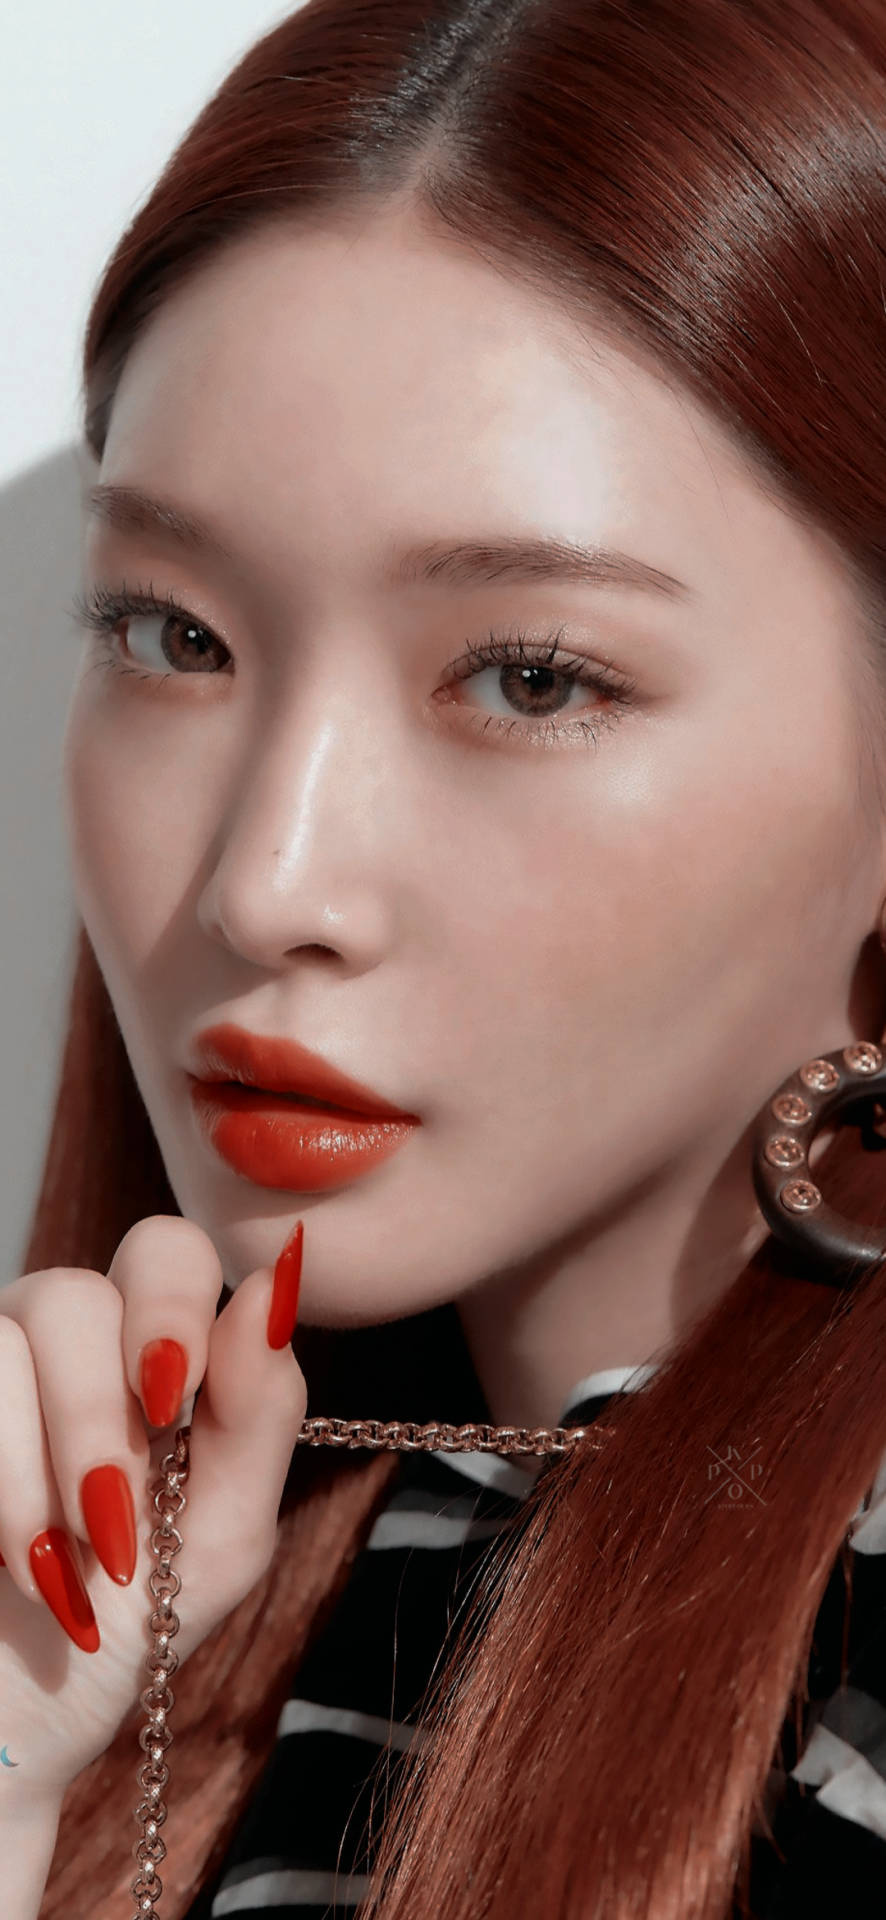 Chungha Face Close-up Background